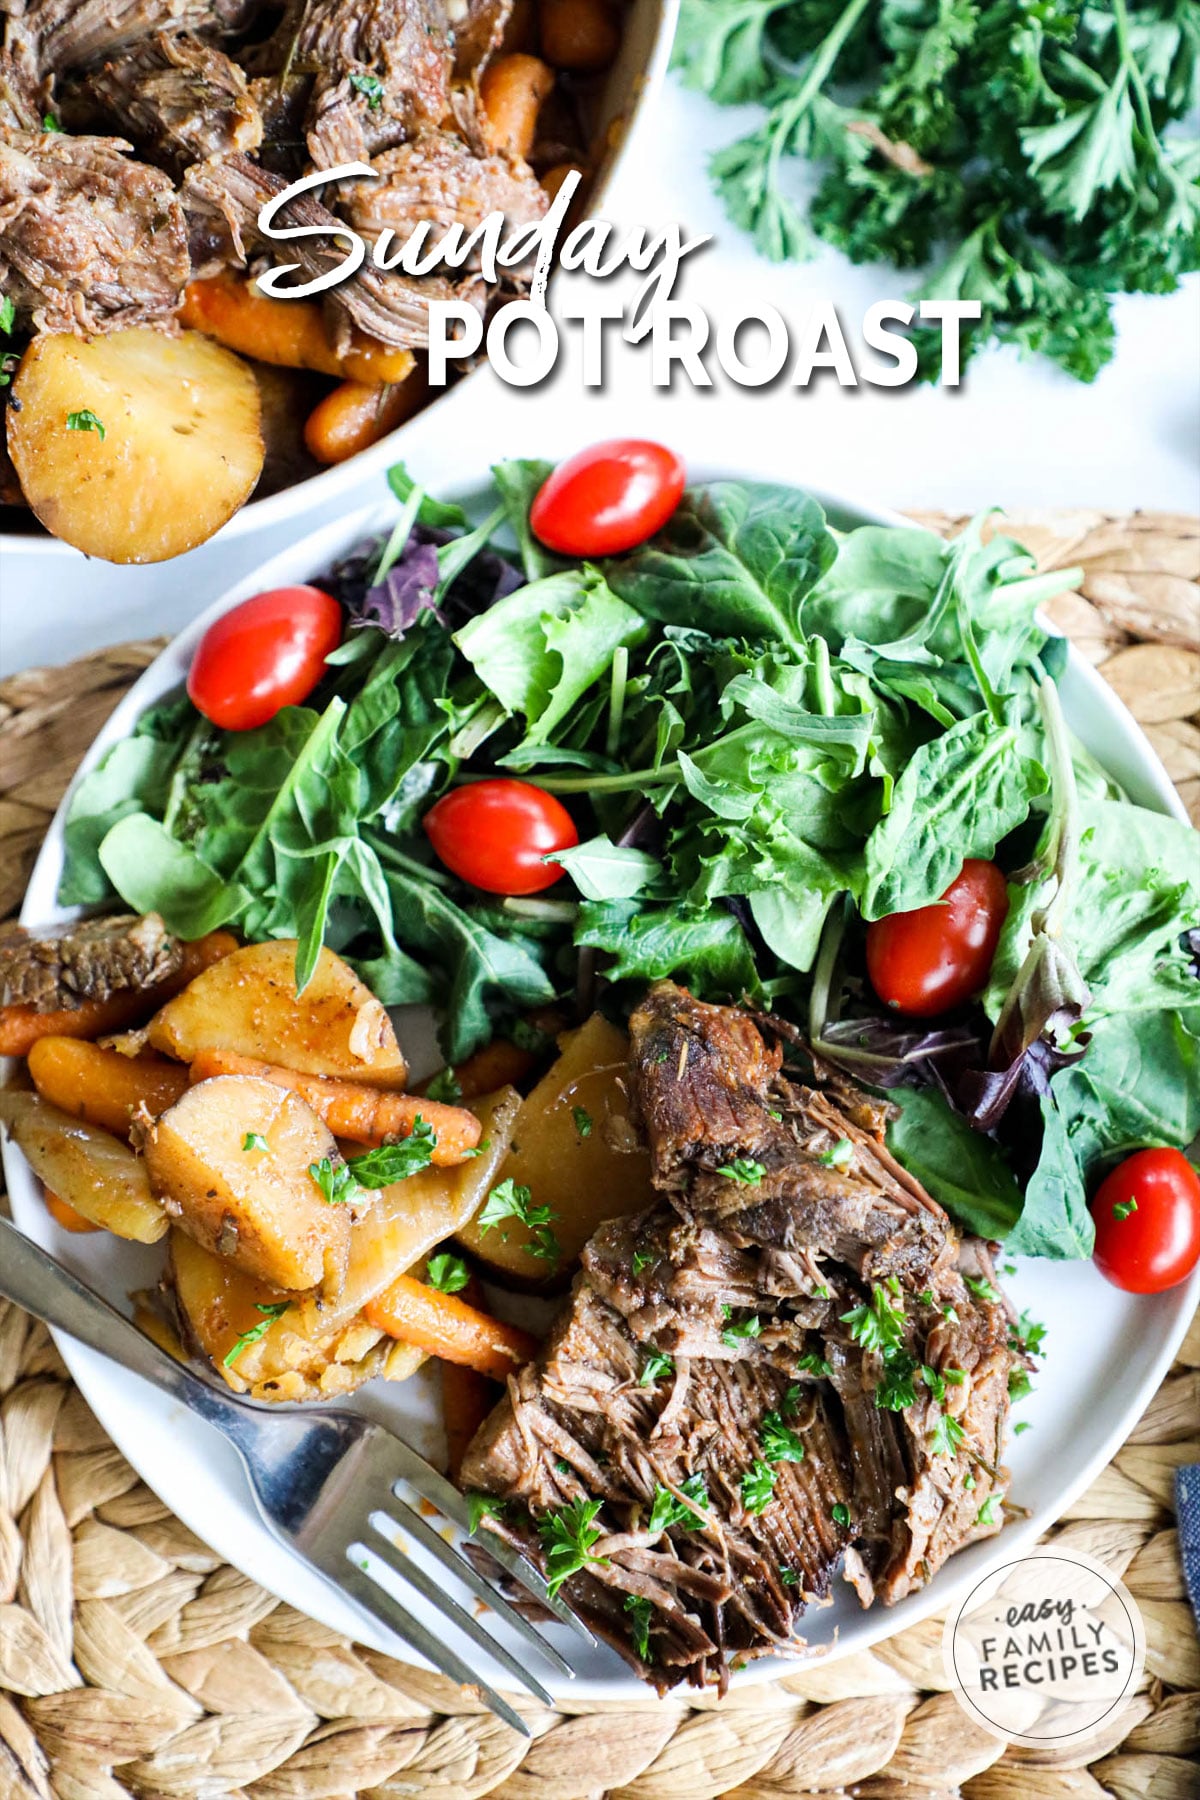 A beef pot roast dinner with potatoes, carrots, and a green salad